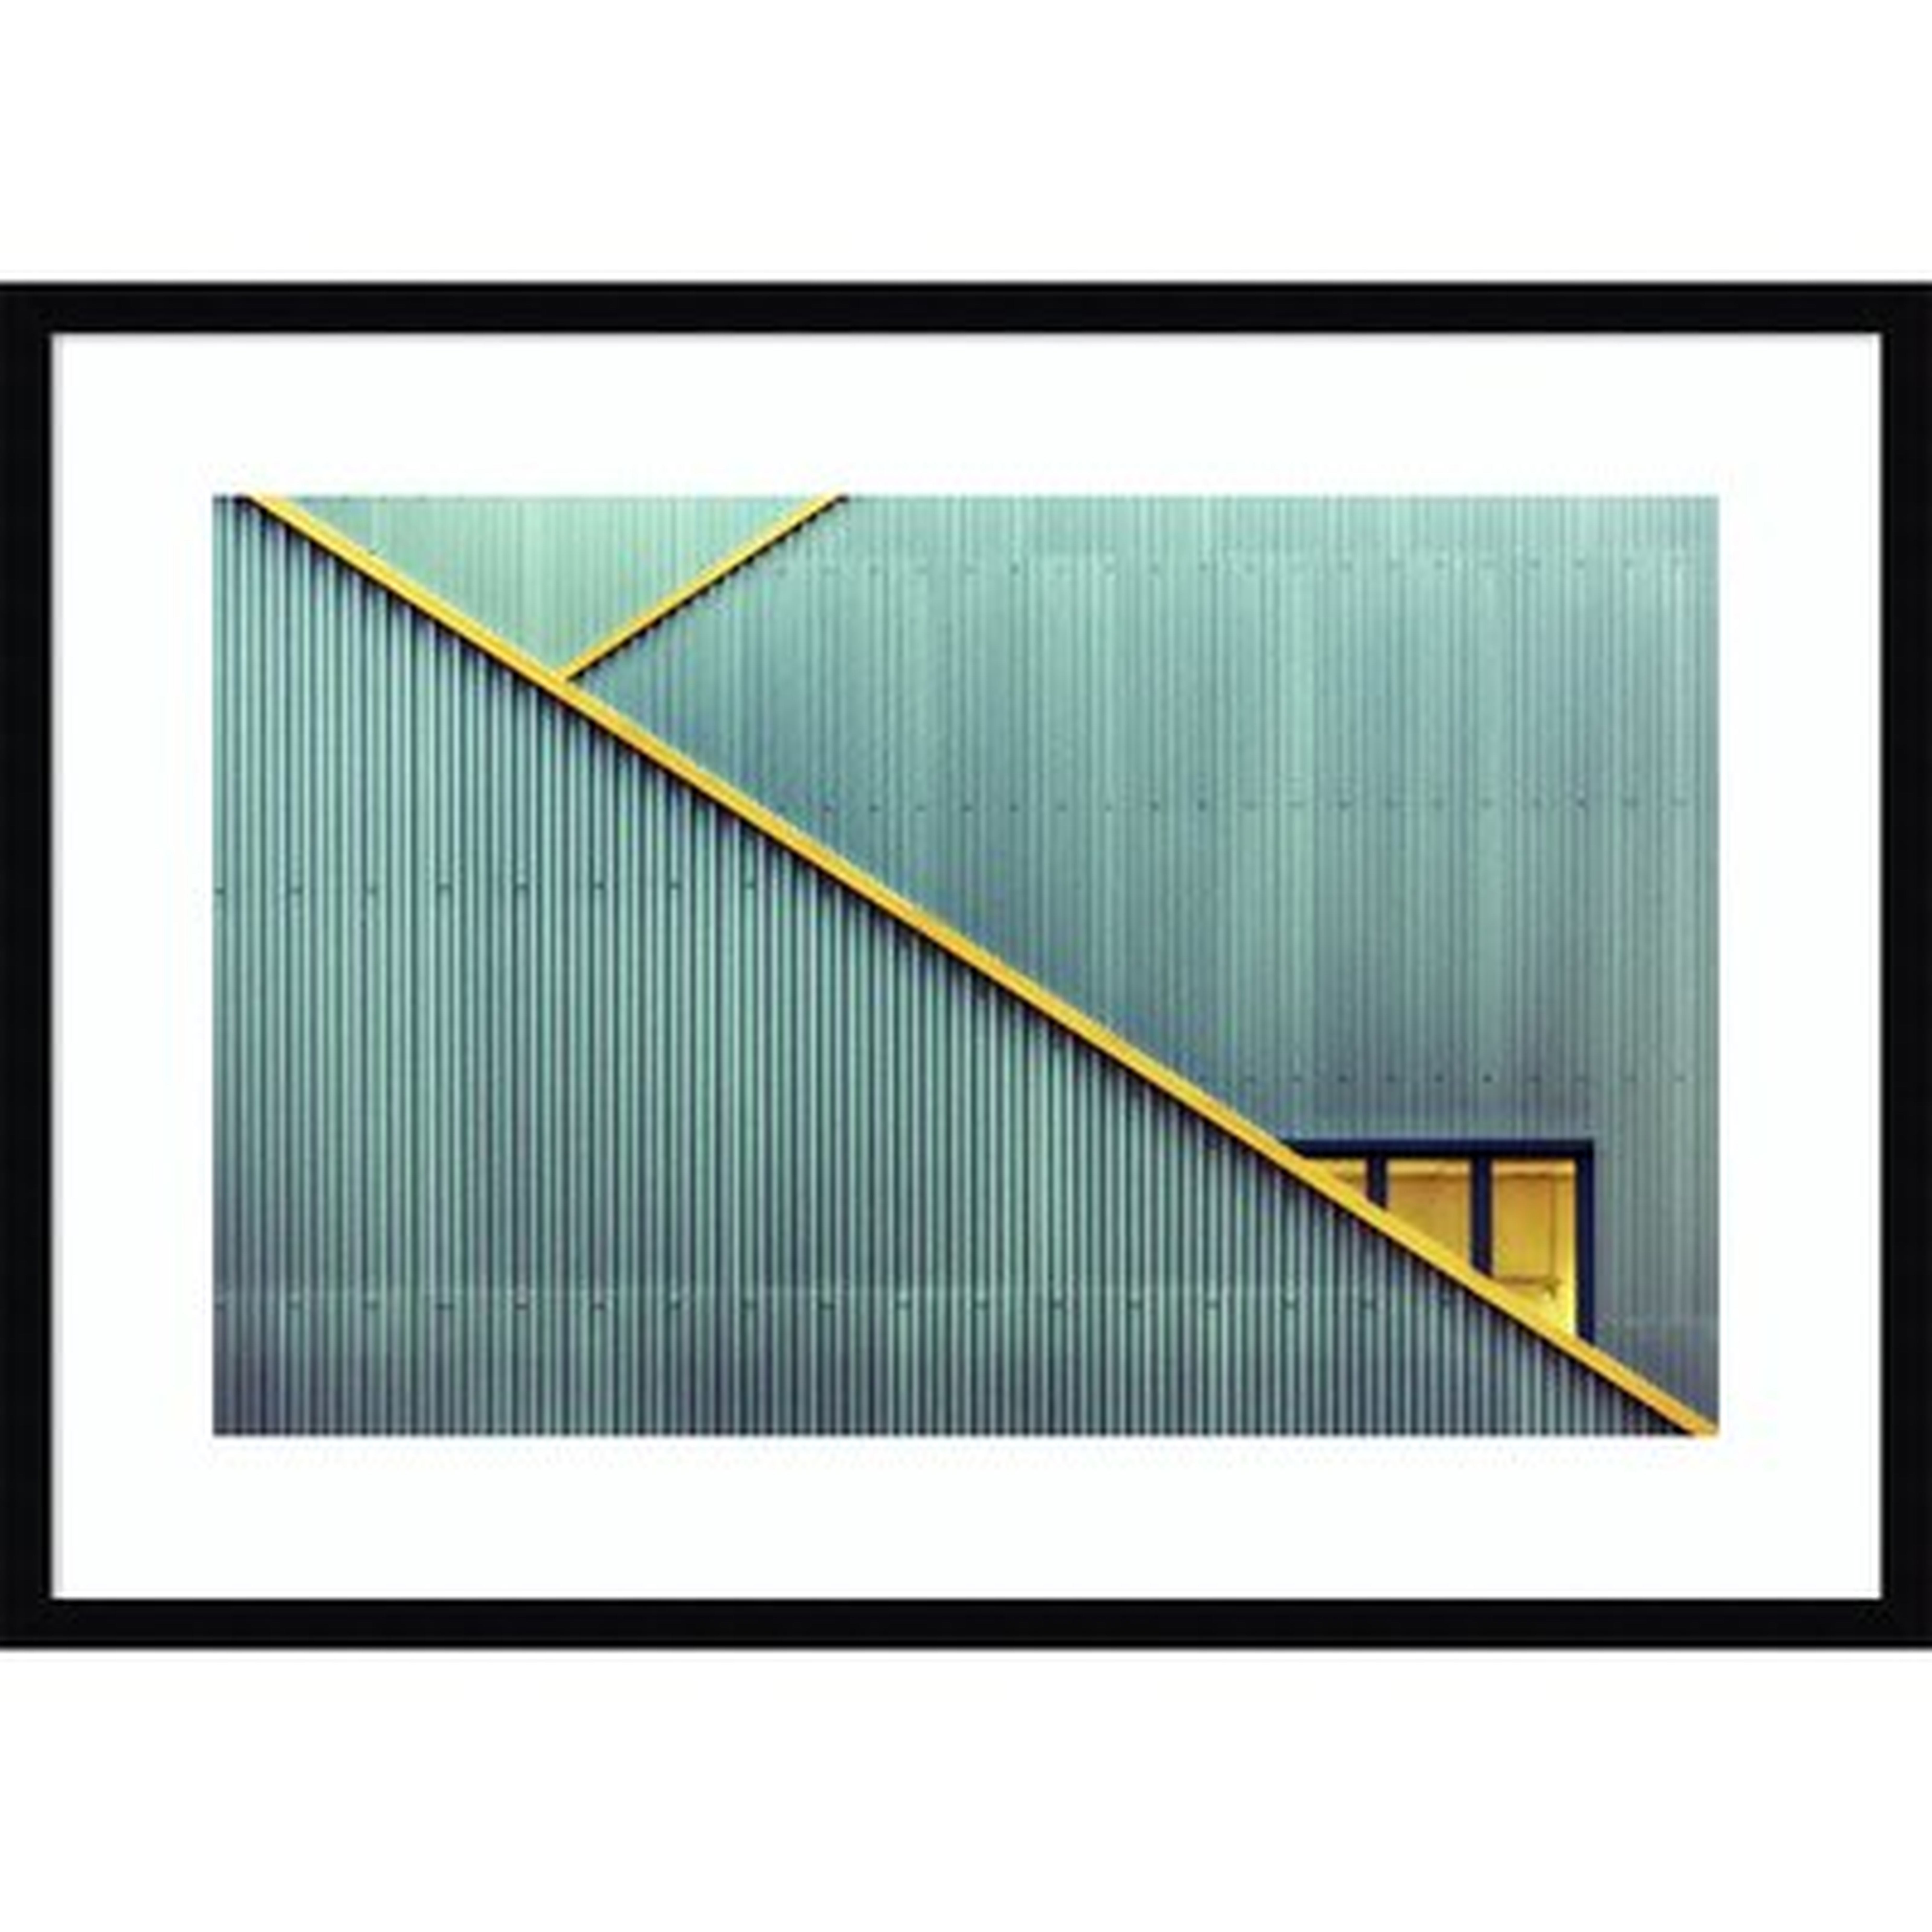 Stairs and Yellow Door - Picture Frame Painting Print on Paper - AllModern